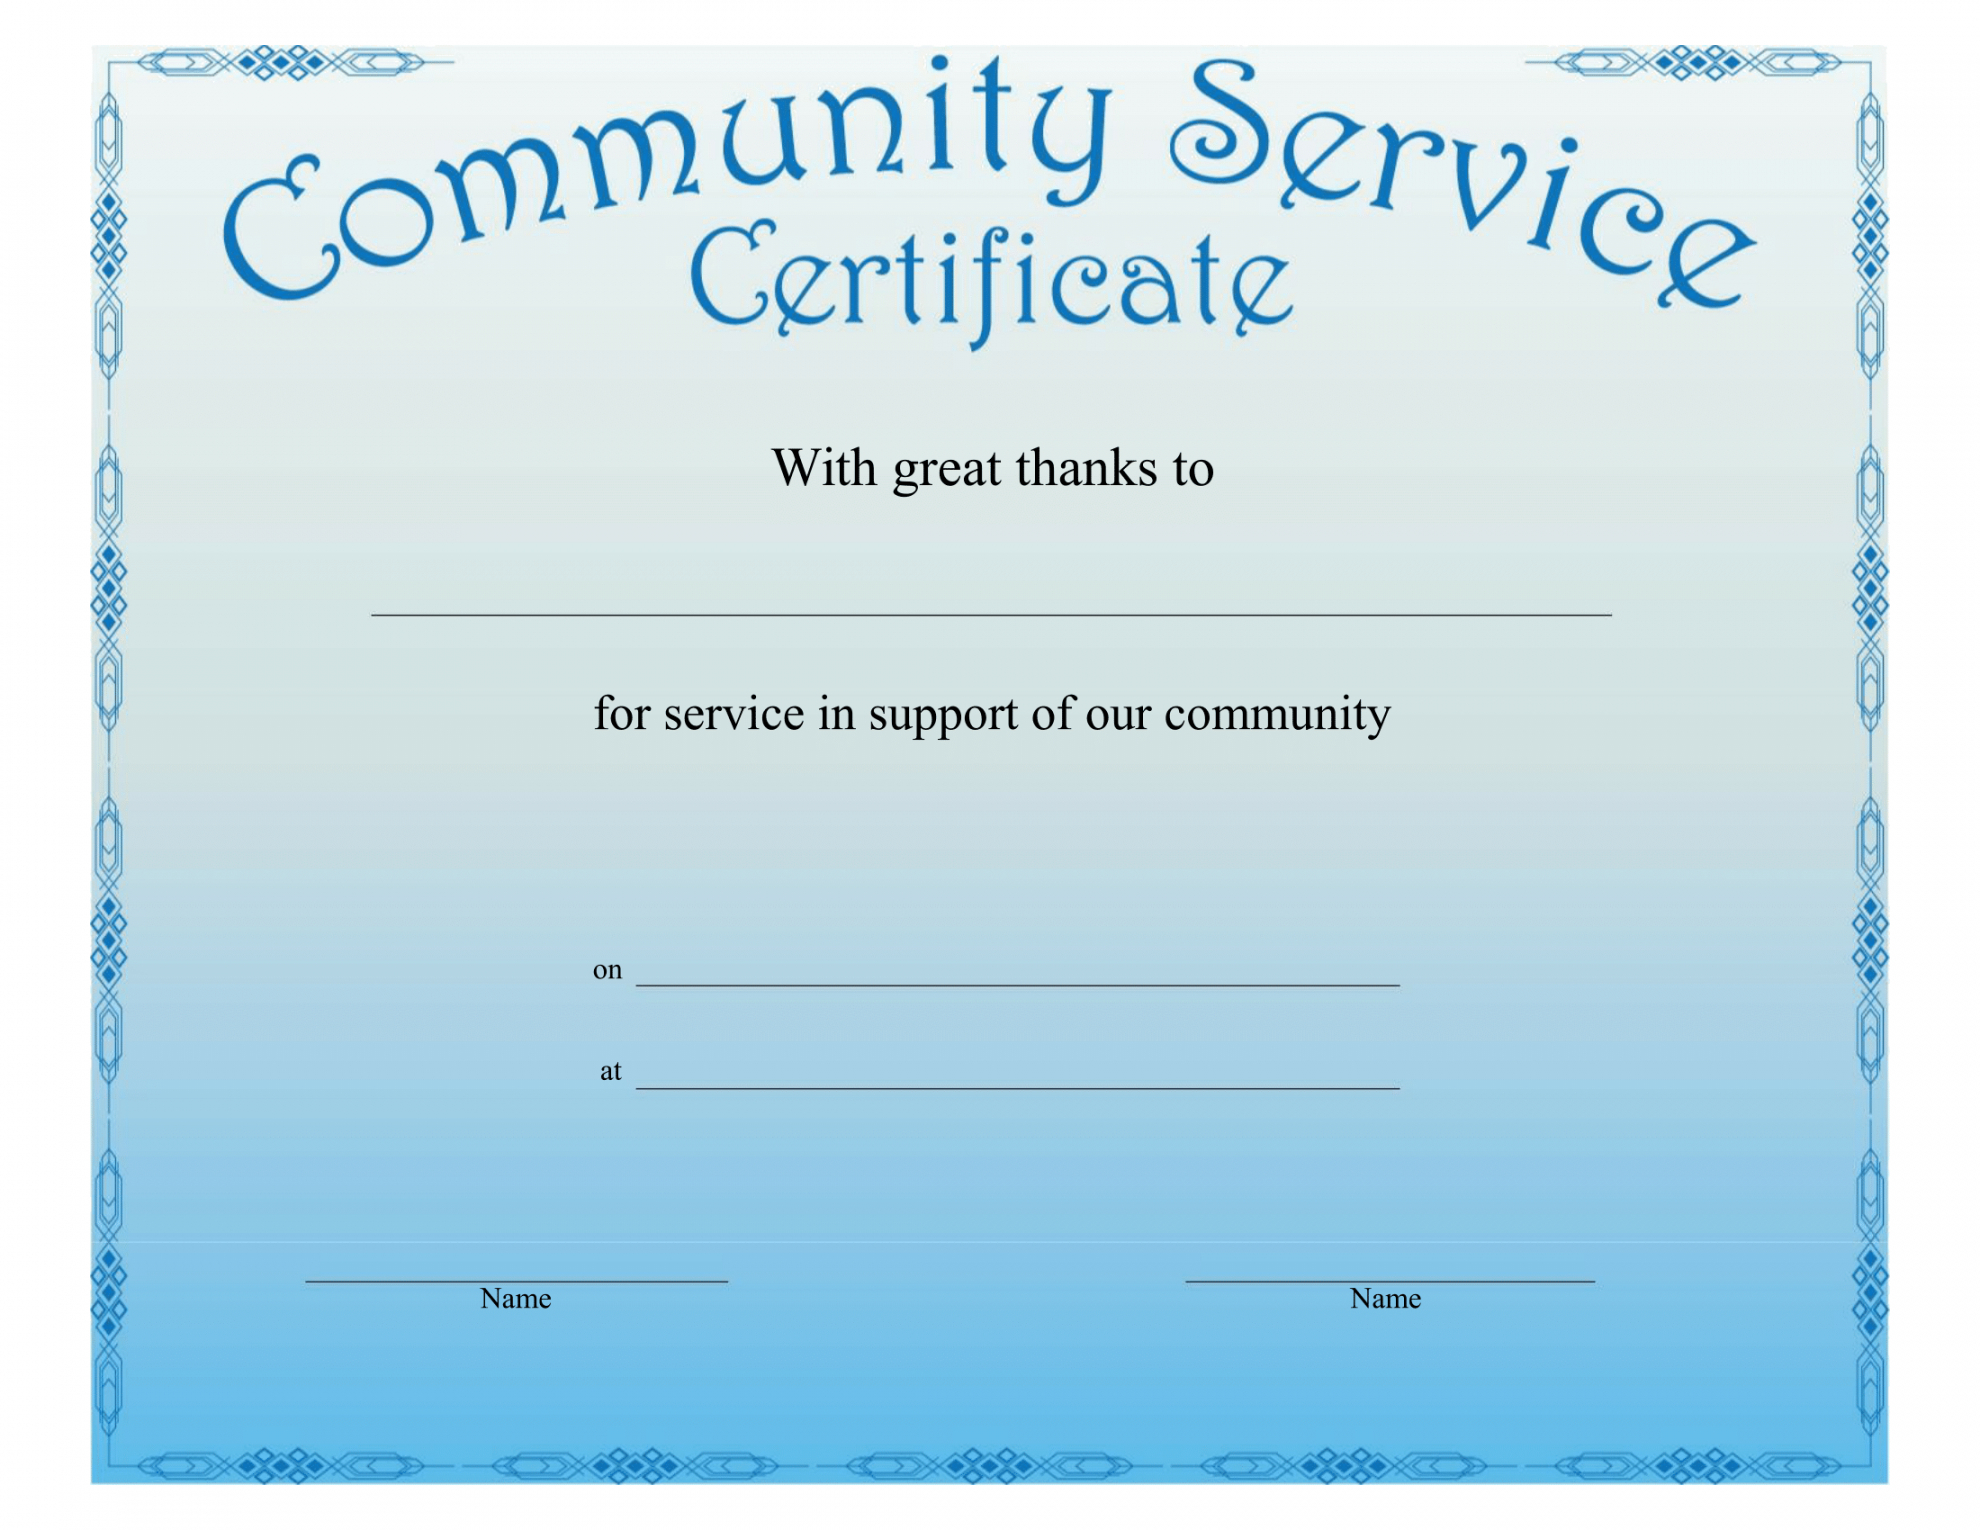 Community Service Certificate Template Intended For This Entitles The Bearer To Template Certificate